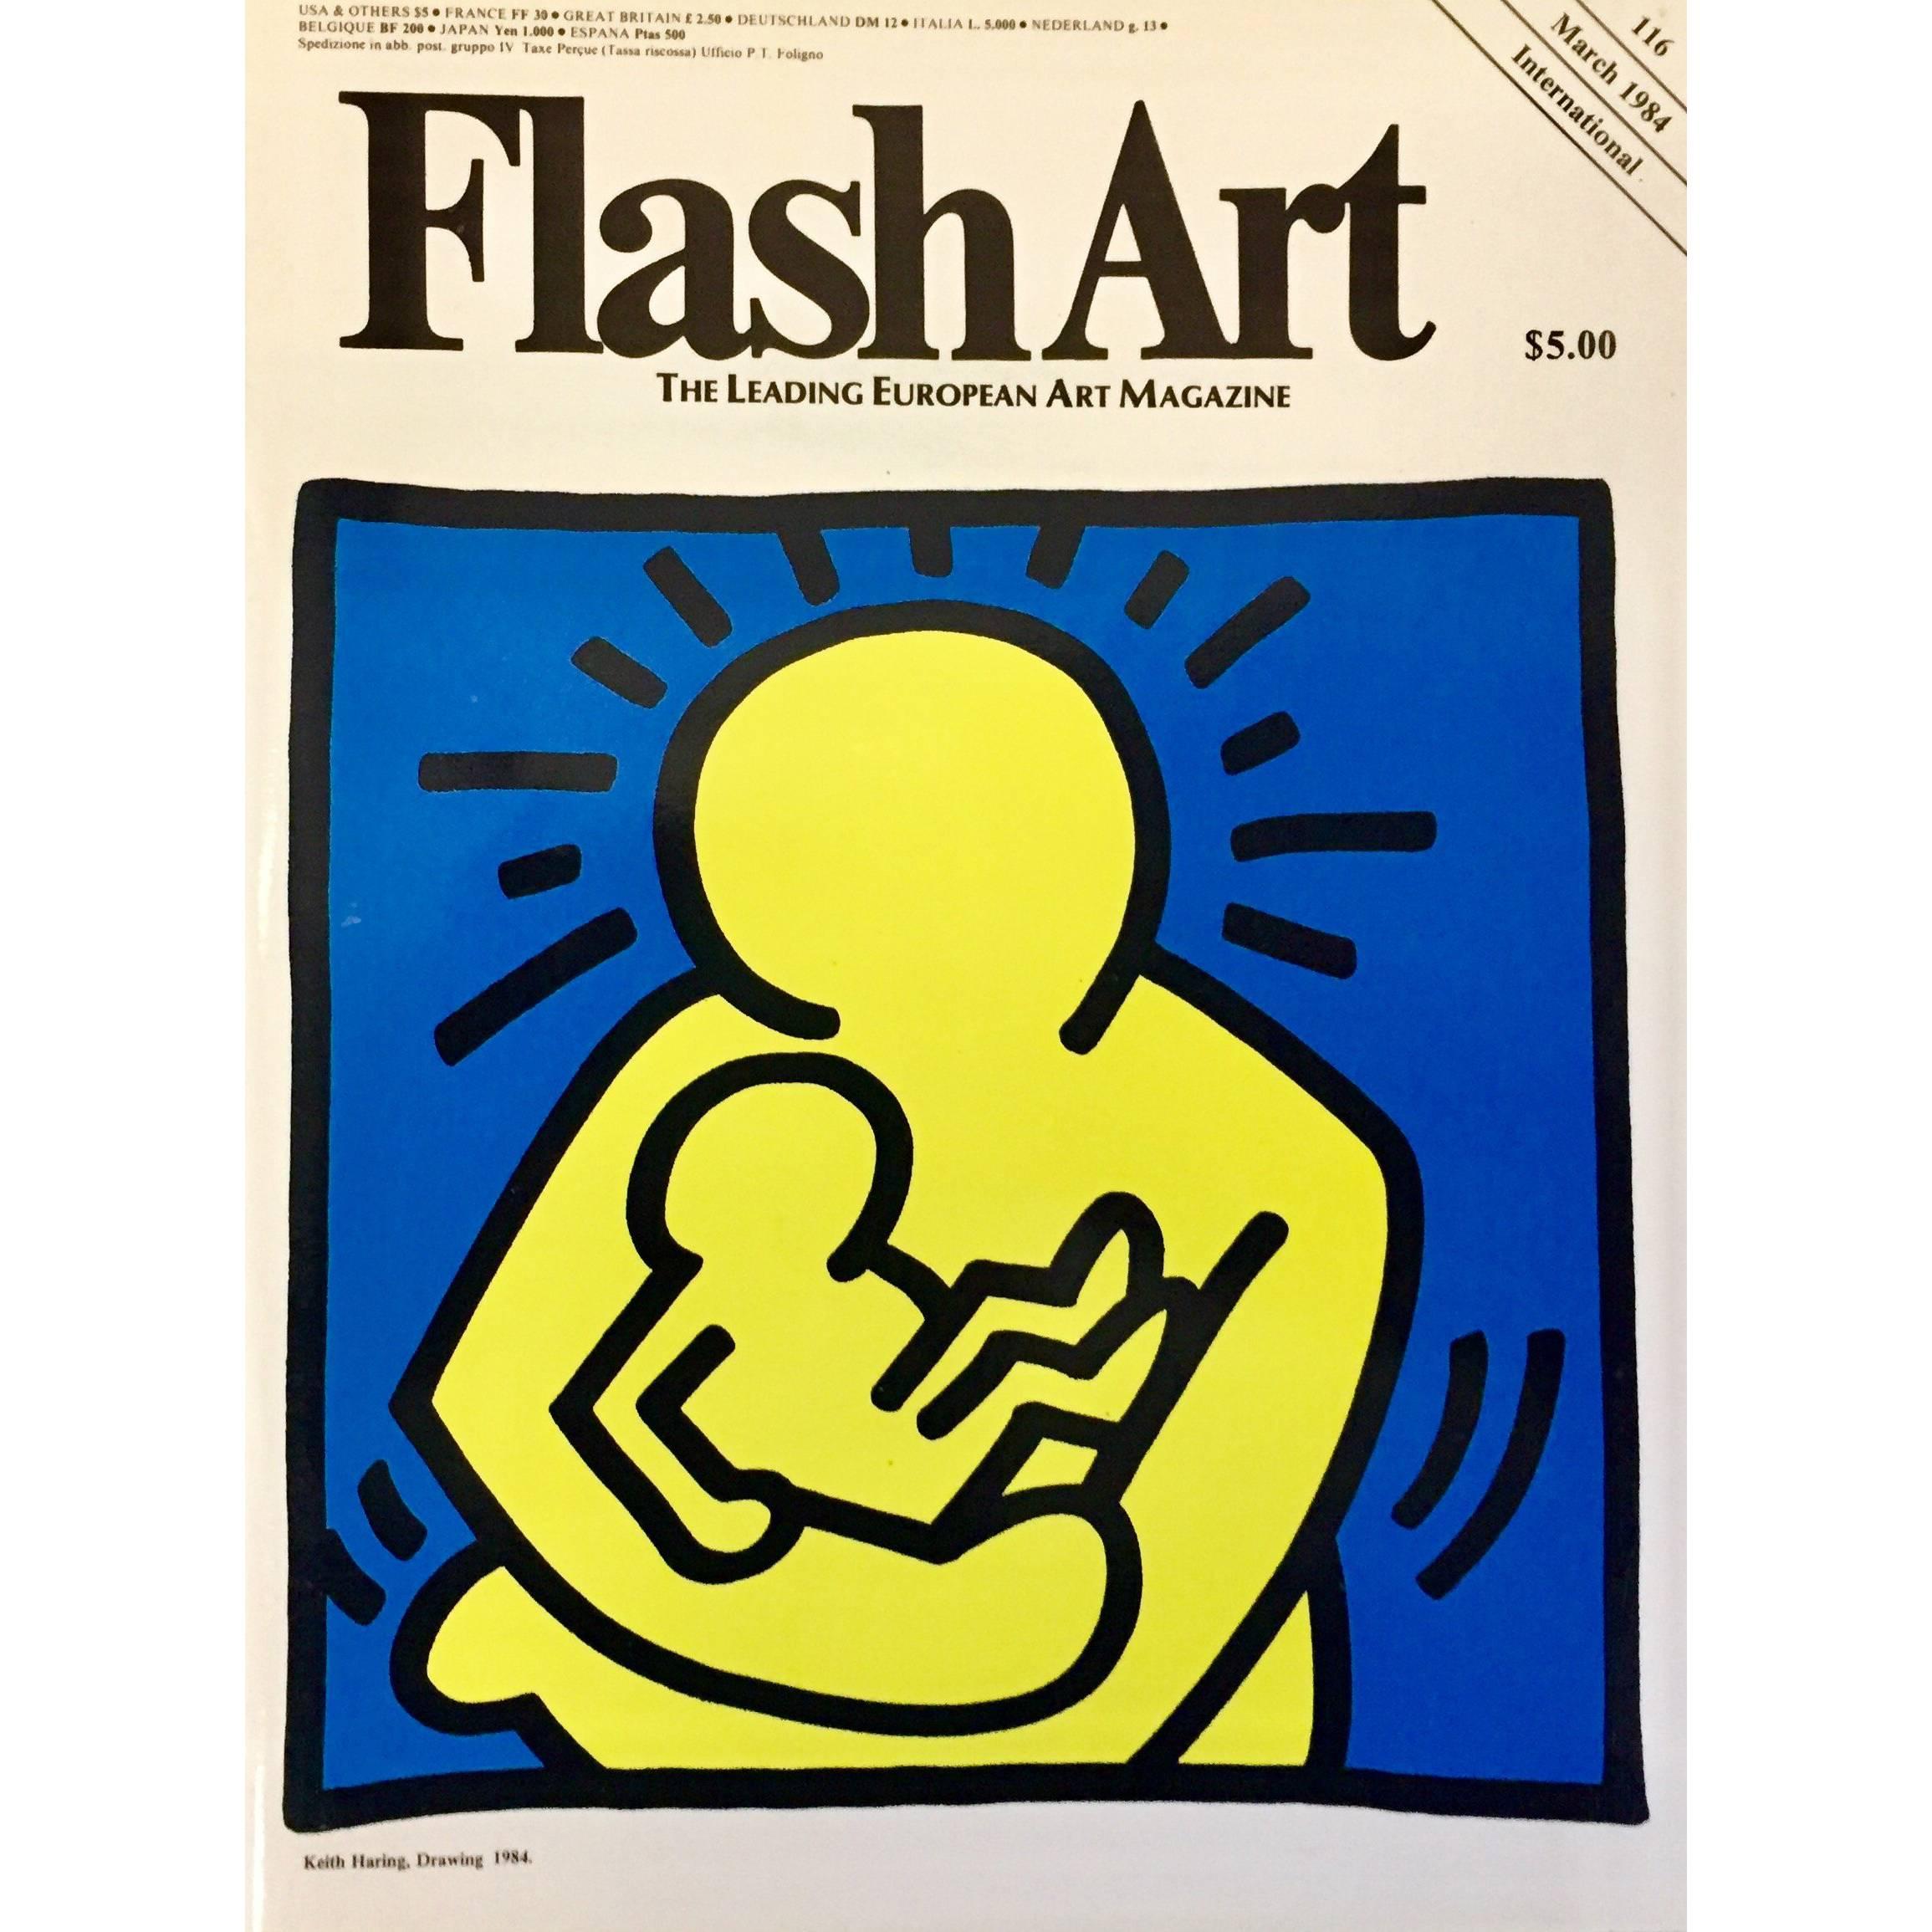 Keith Haring 1984 Illustrated Cover Art